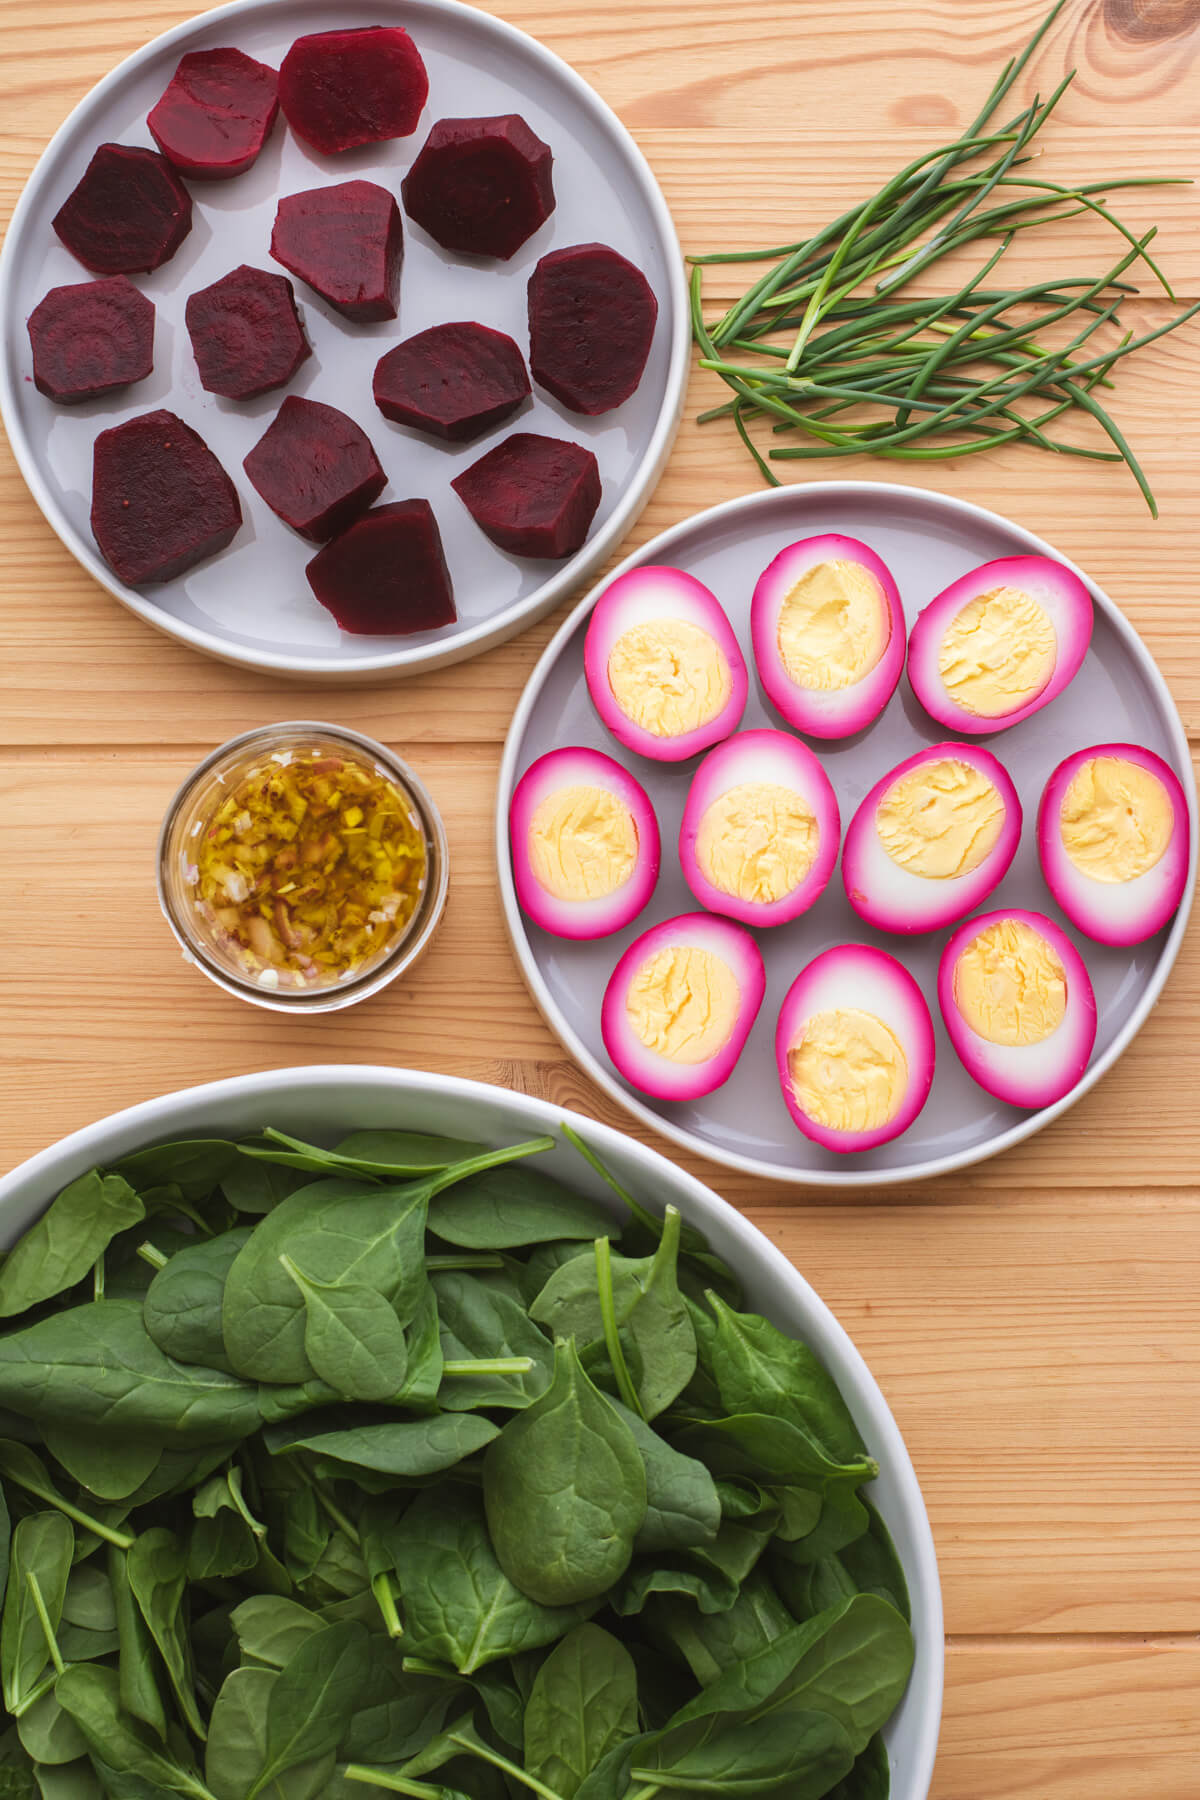 Ingredients needed to make beet spinach salad with beet pickled eggs and beets.